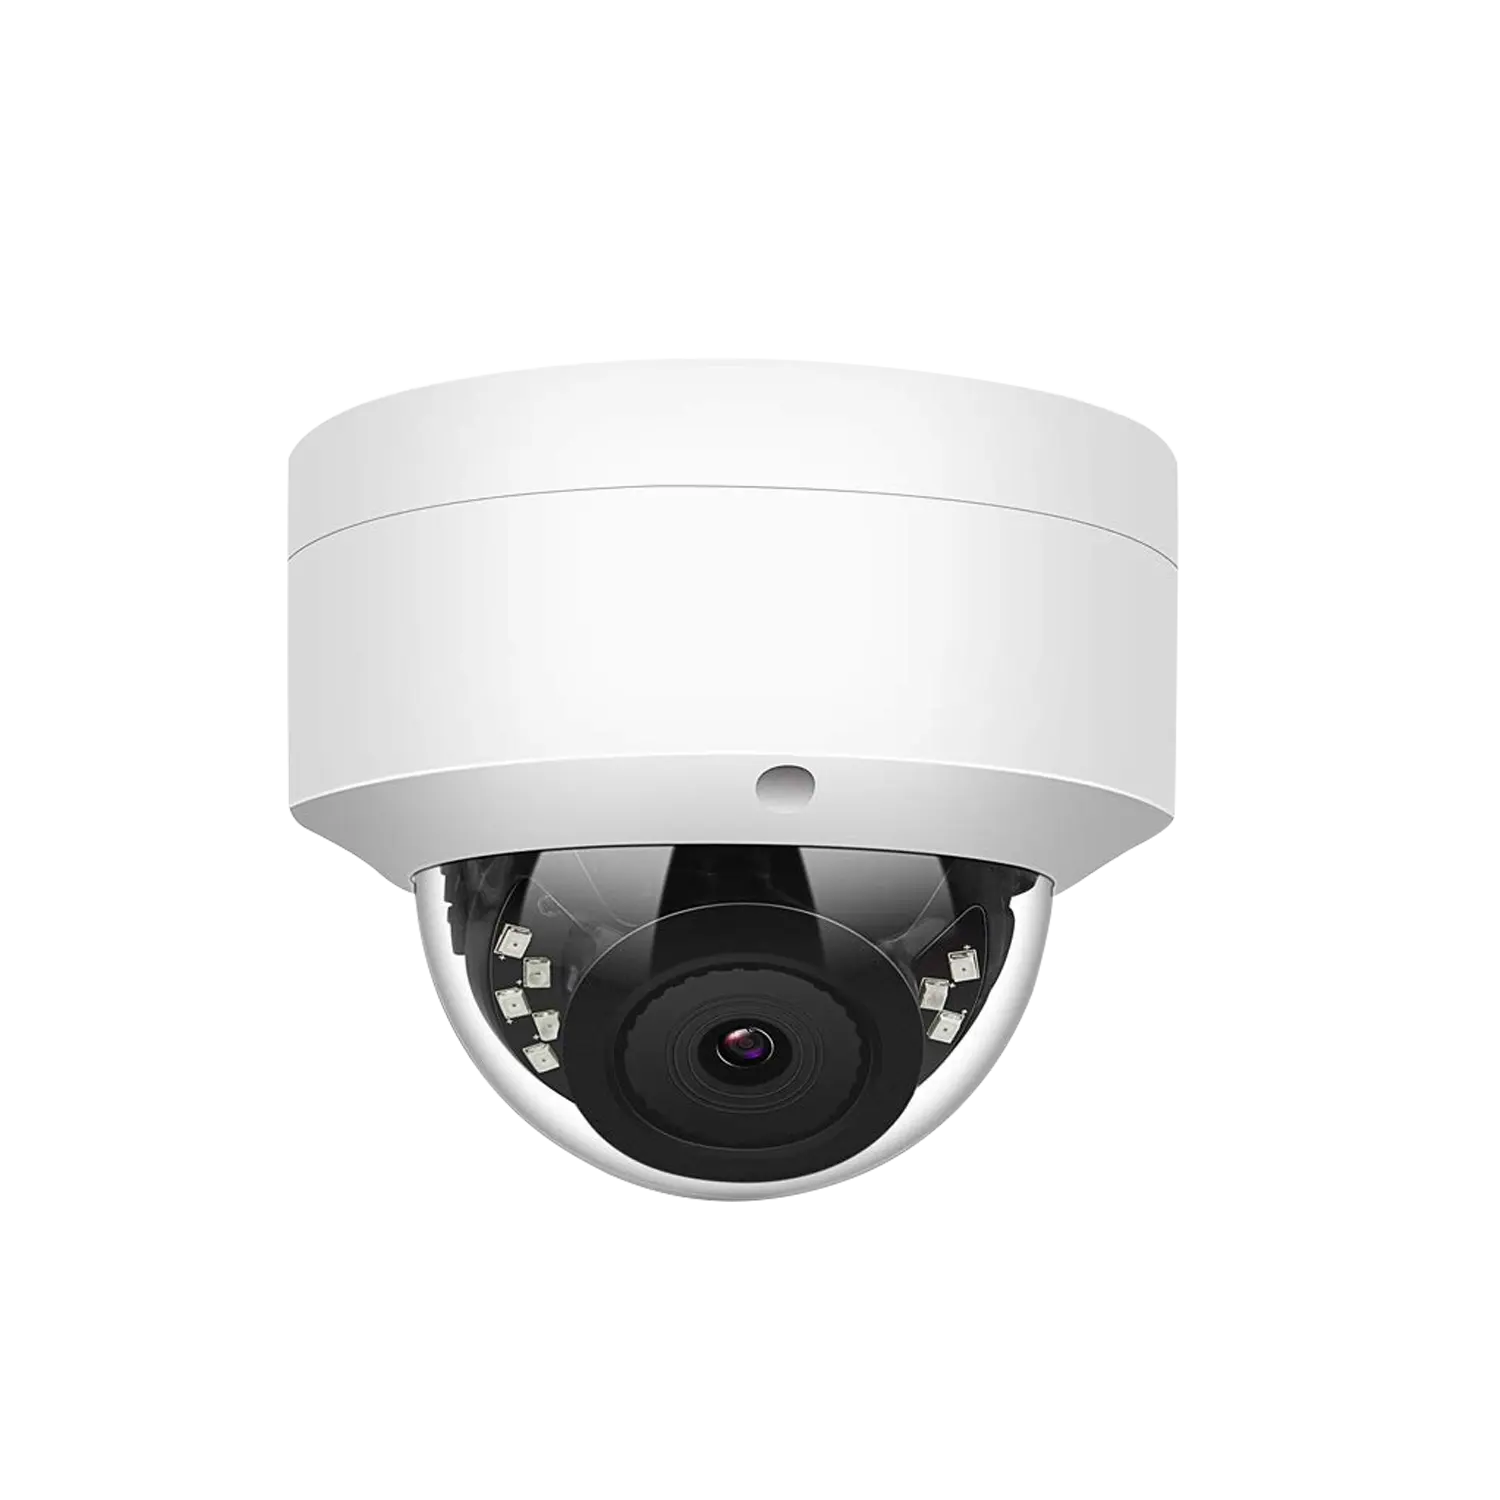 Plug and play working with Hik POE NVR 2.8-12mm VF Lens vandalproof dome imx335 CMOS 5MP POE IP Camera